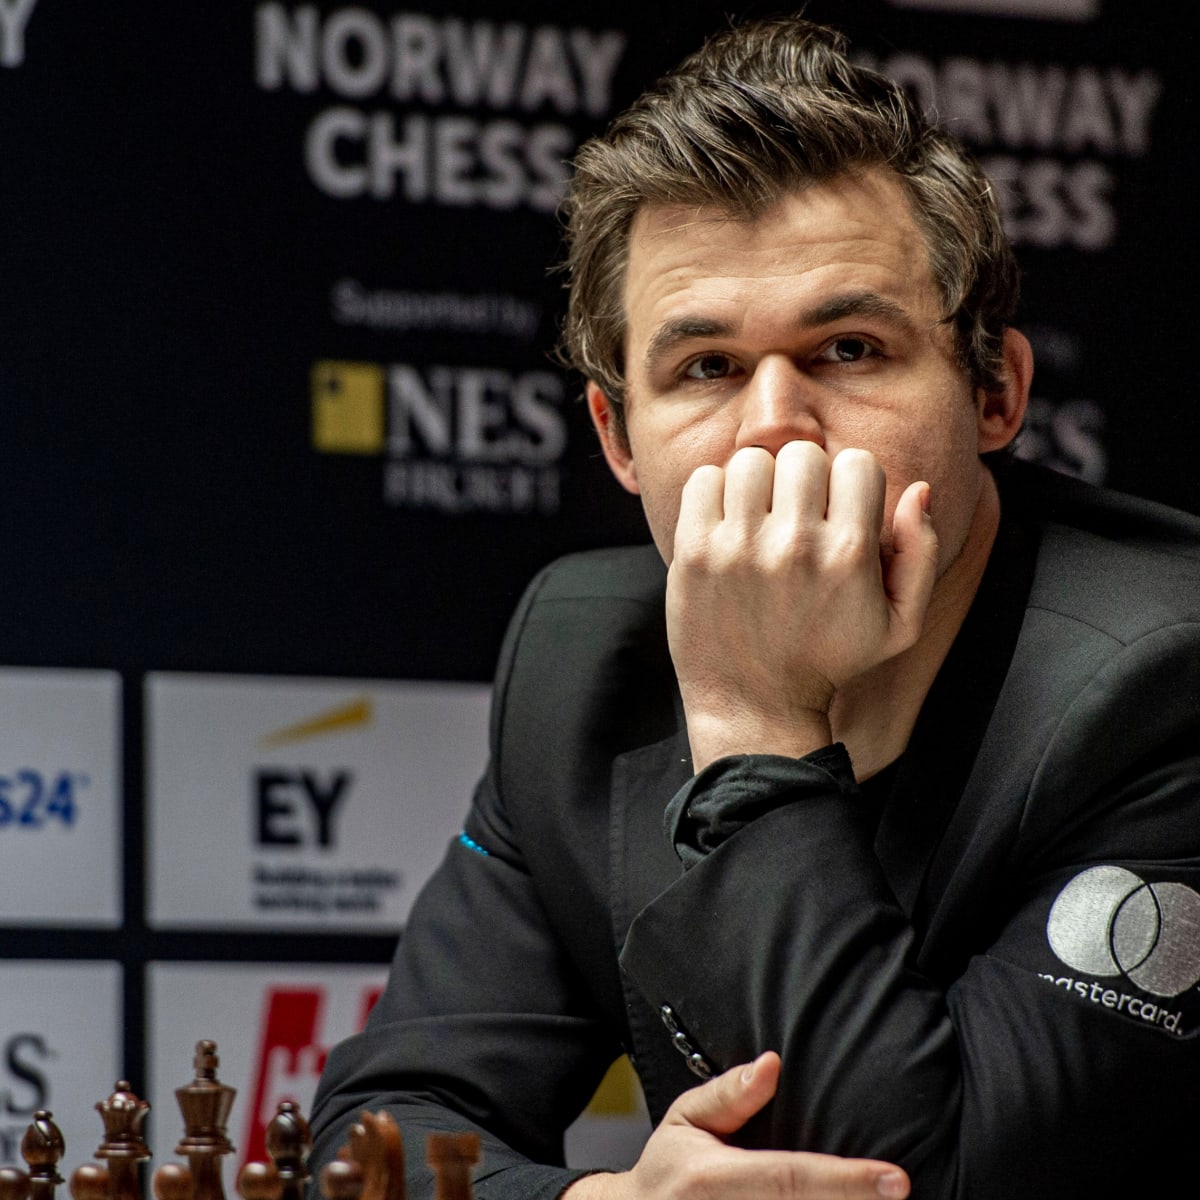 Magnus Carlsen Withdraws from Sinquefield Cup